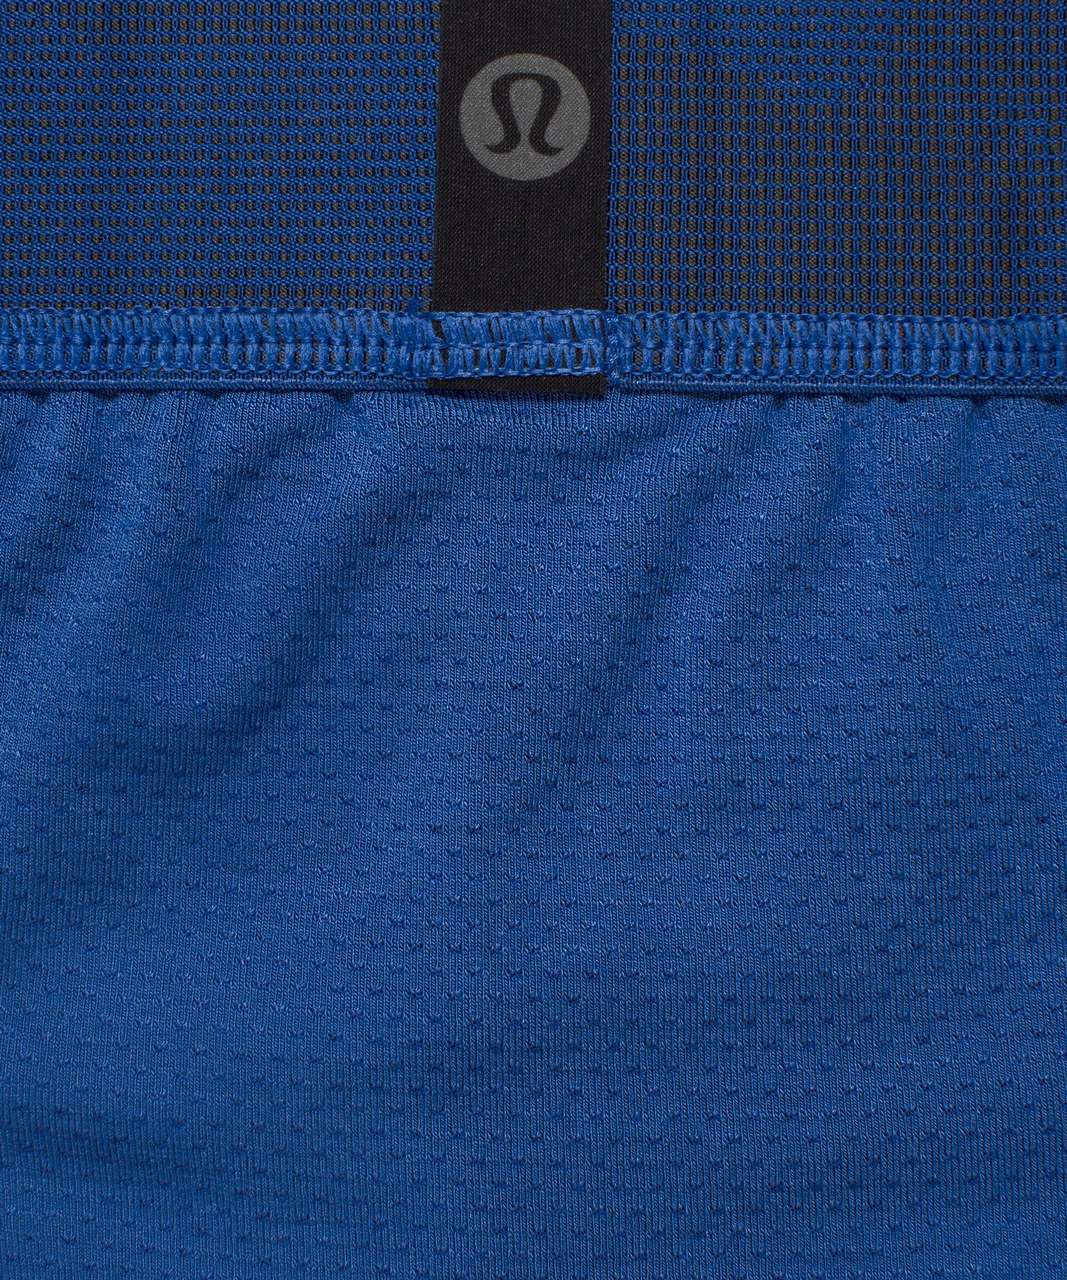 Lululemon Always In Motion Boxer Mesh 5" - Symphony Blue (First Release)